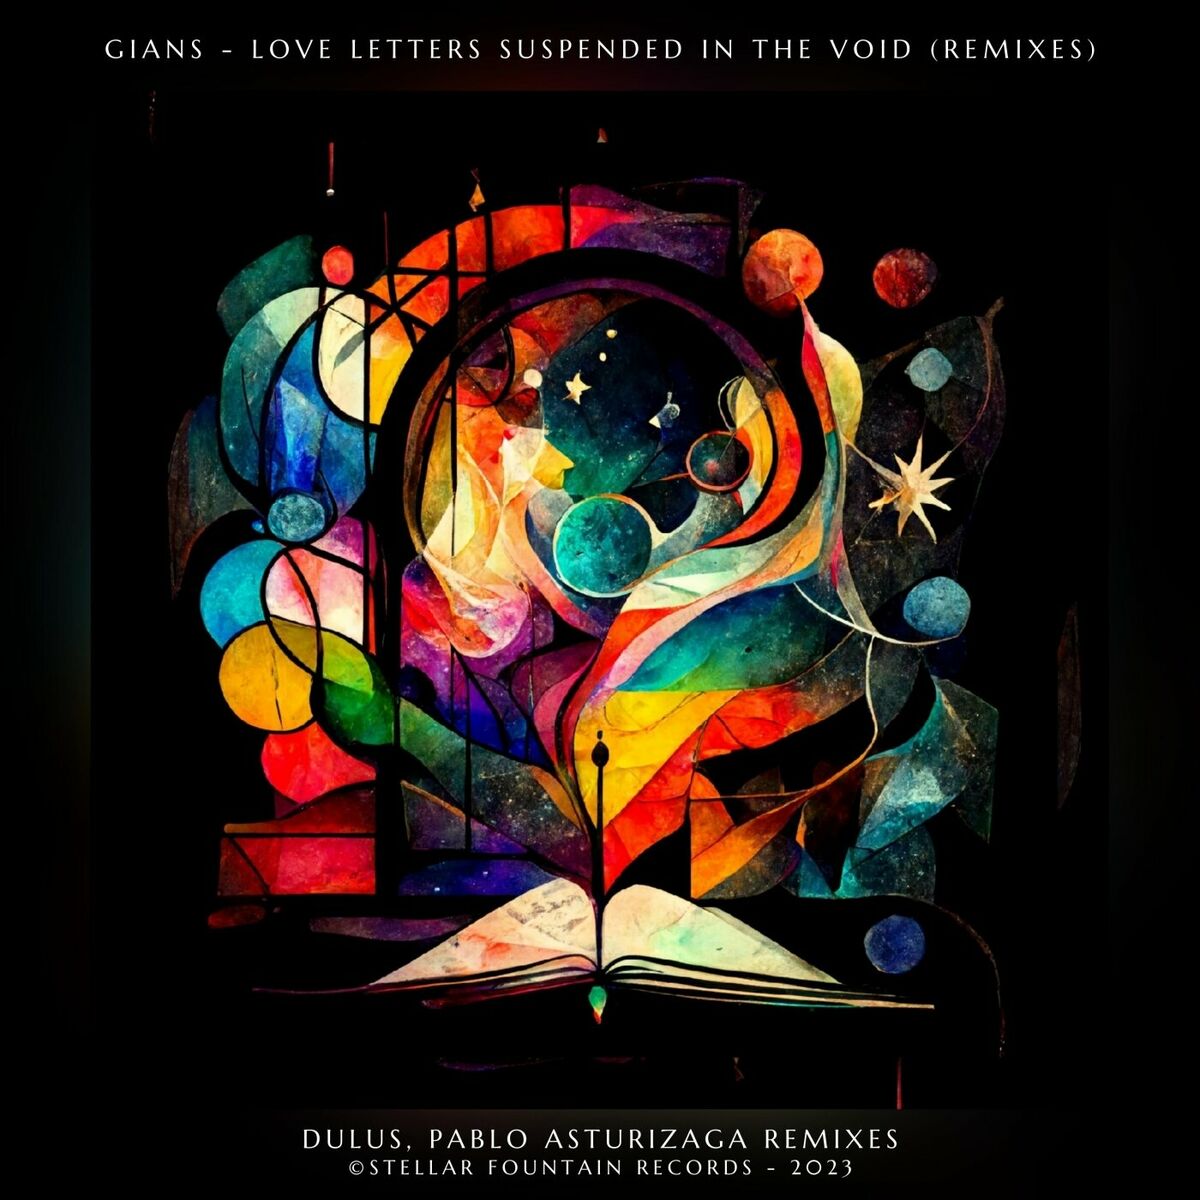 Gians - Love Letters Suspended in the Void (Dulus Extended Remix)